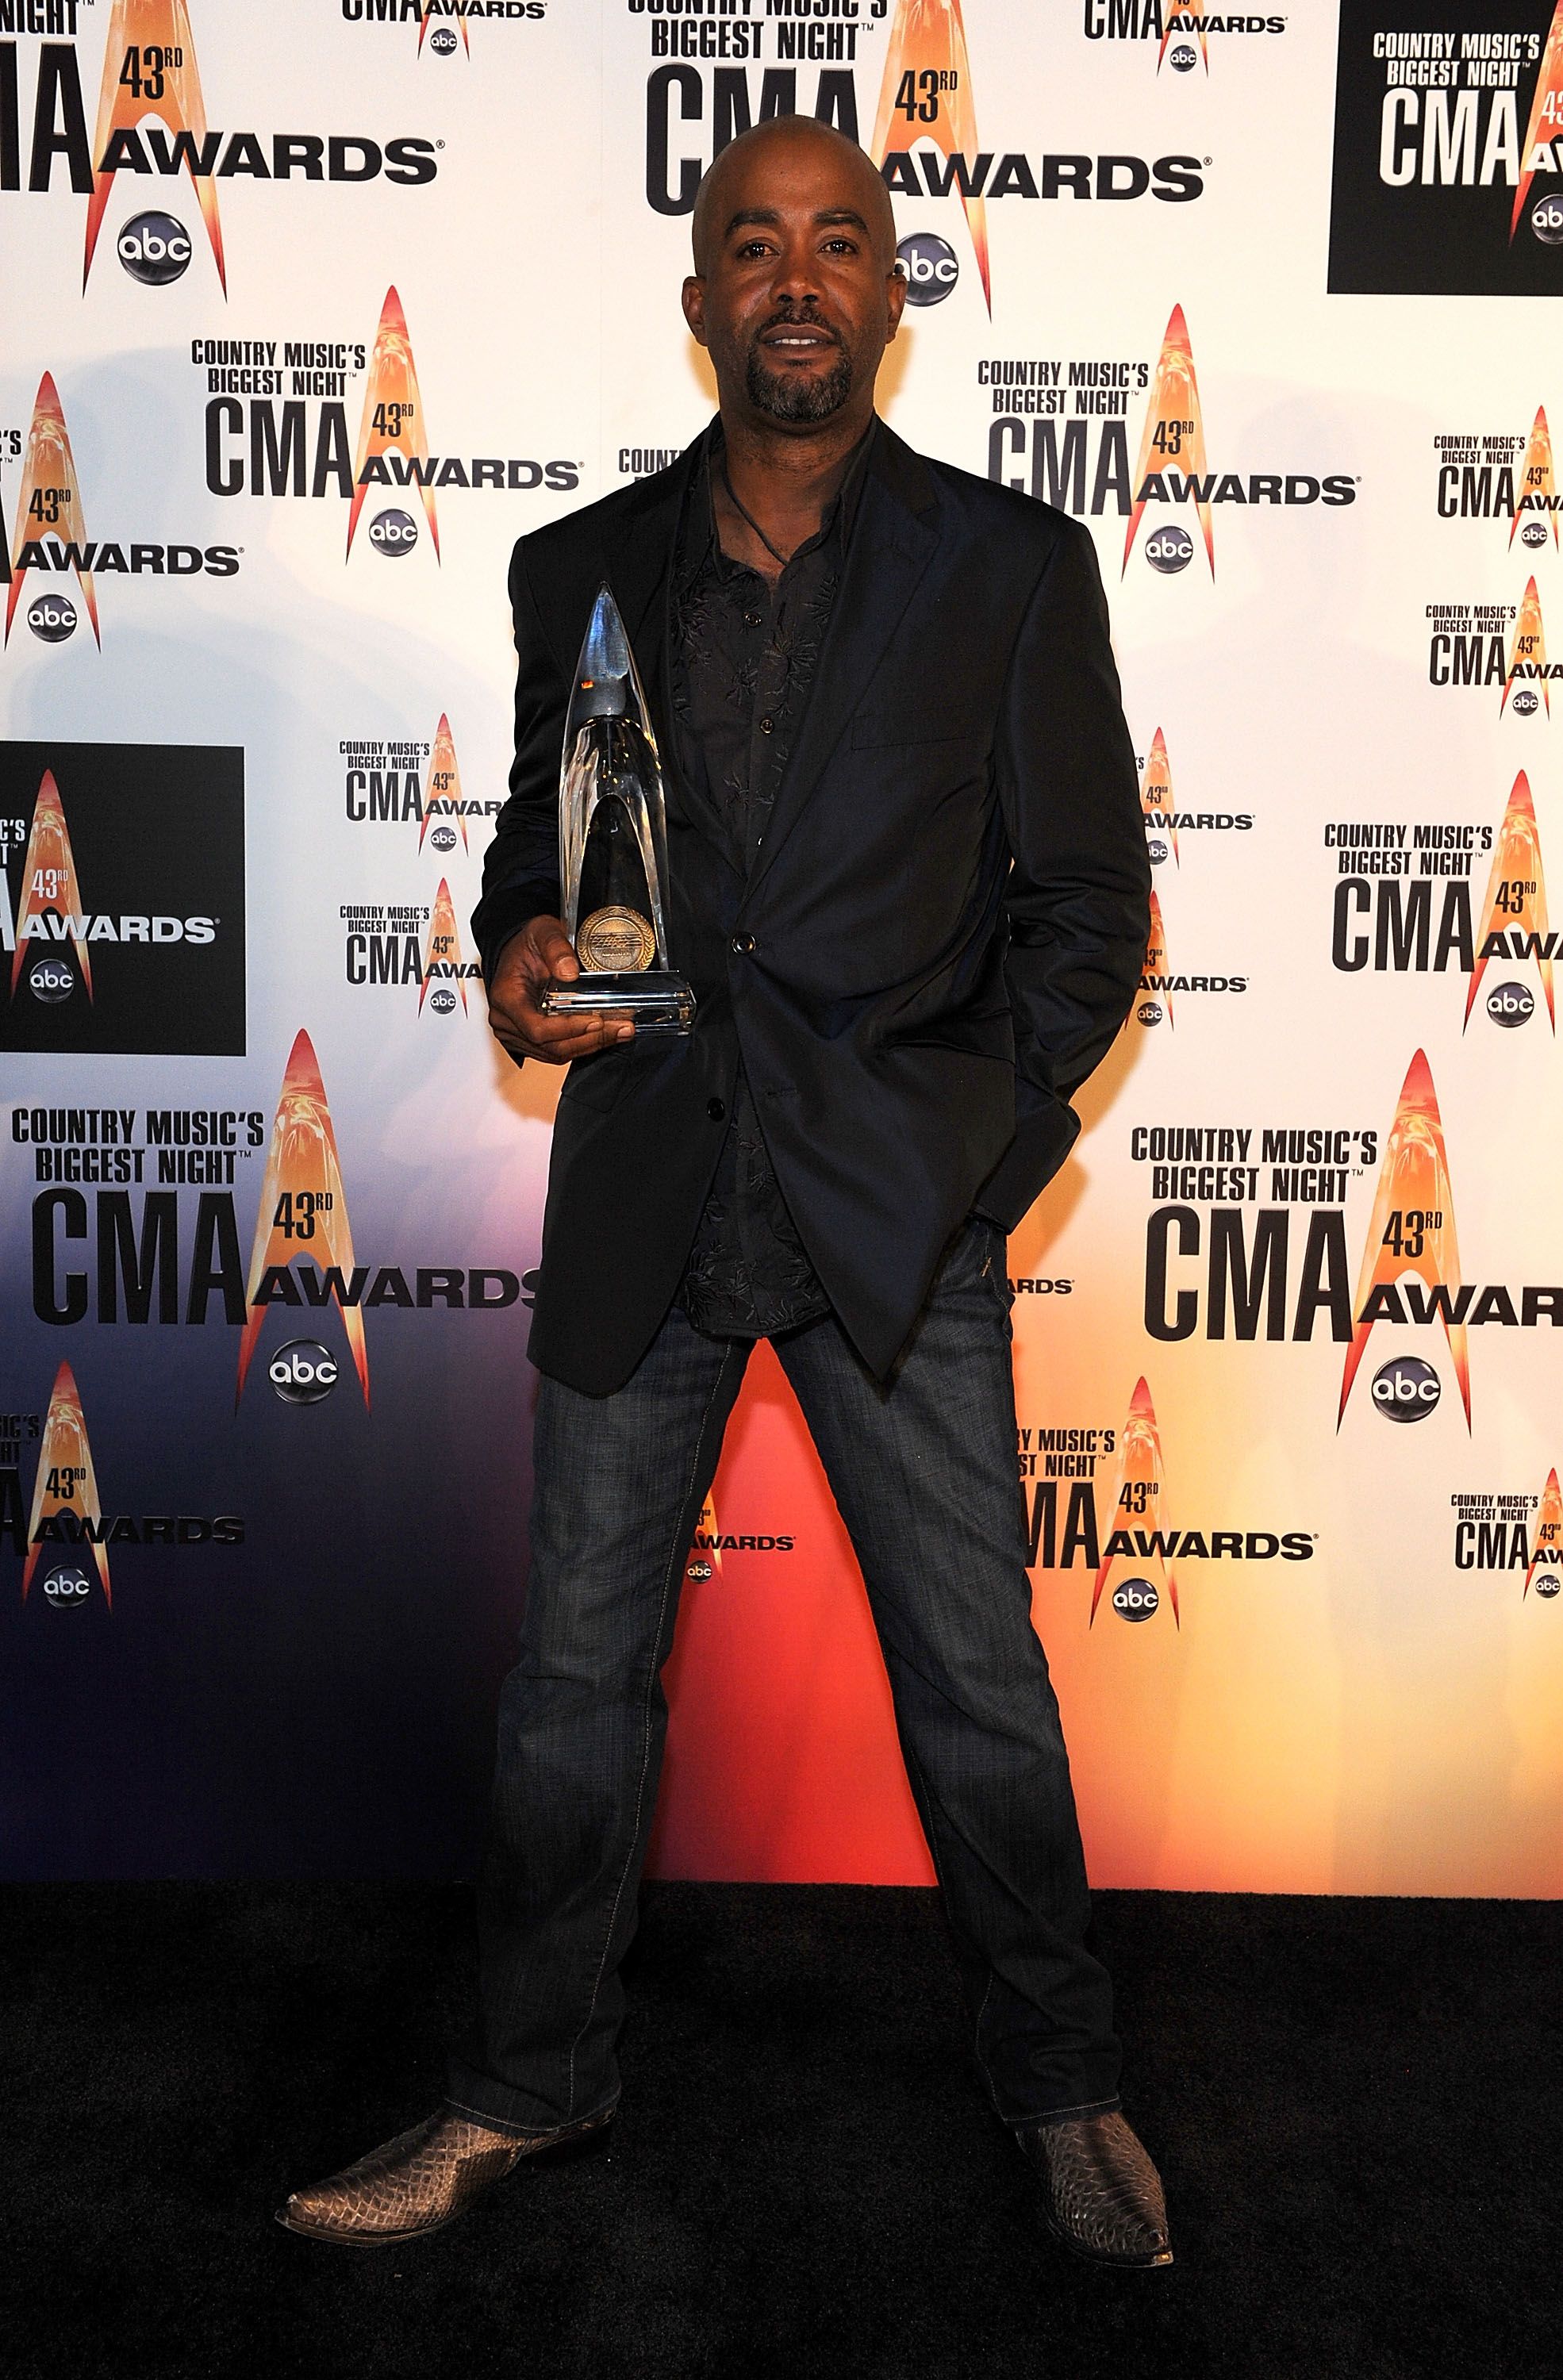 Darius Rucker at the Sommet Center on November 11, 2009 in Nashville, Tennessee. | Photo: Getty Images